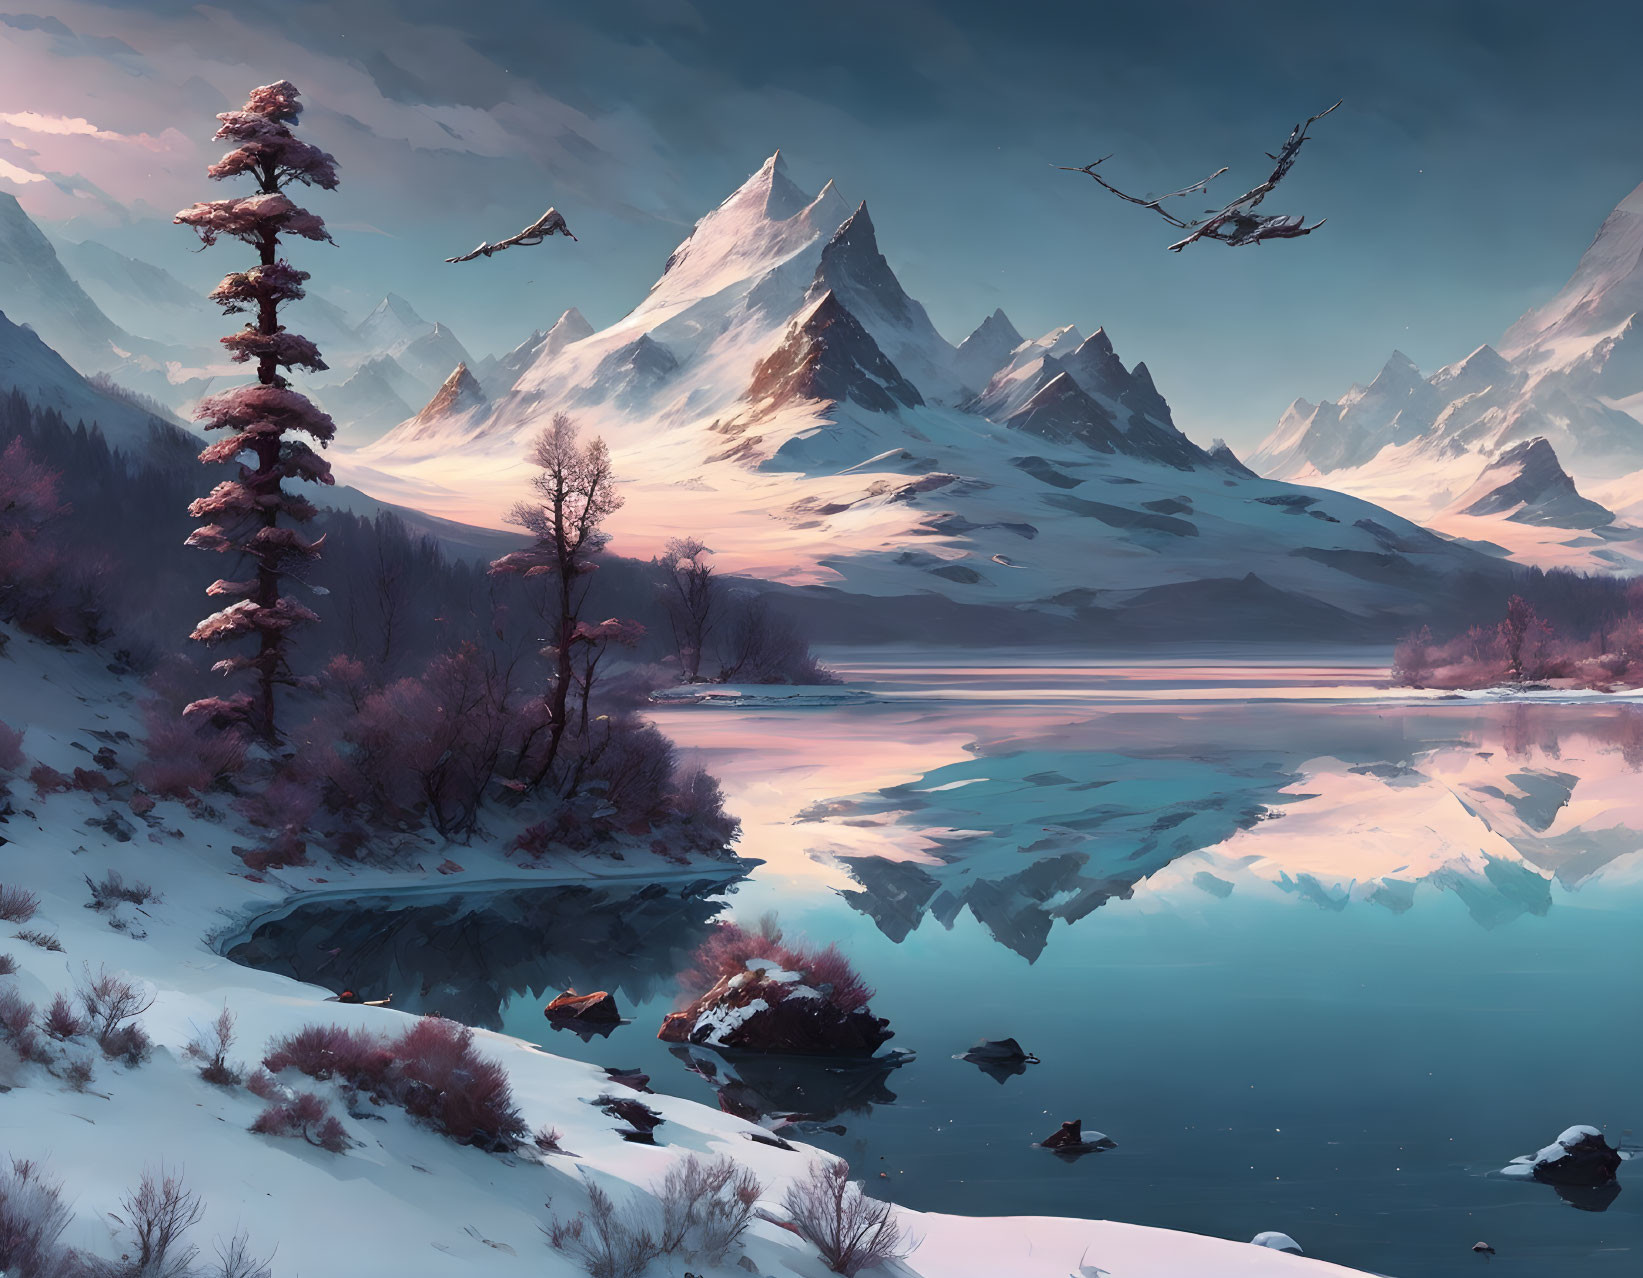 Snow-capped peaks and serene lake in tranquil landscape at dusk with tall pine and flying birds under past